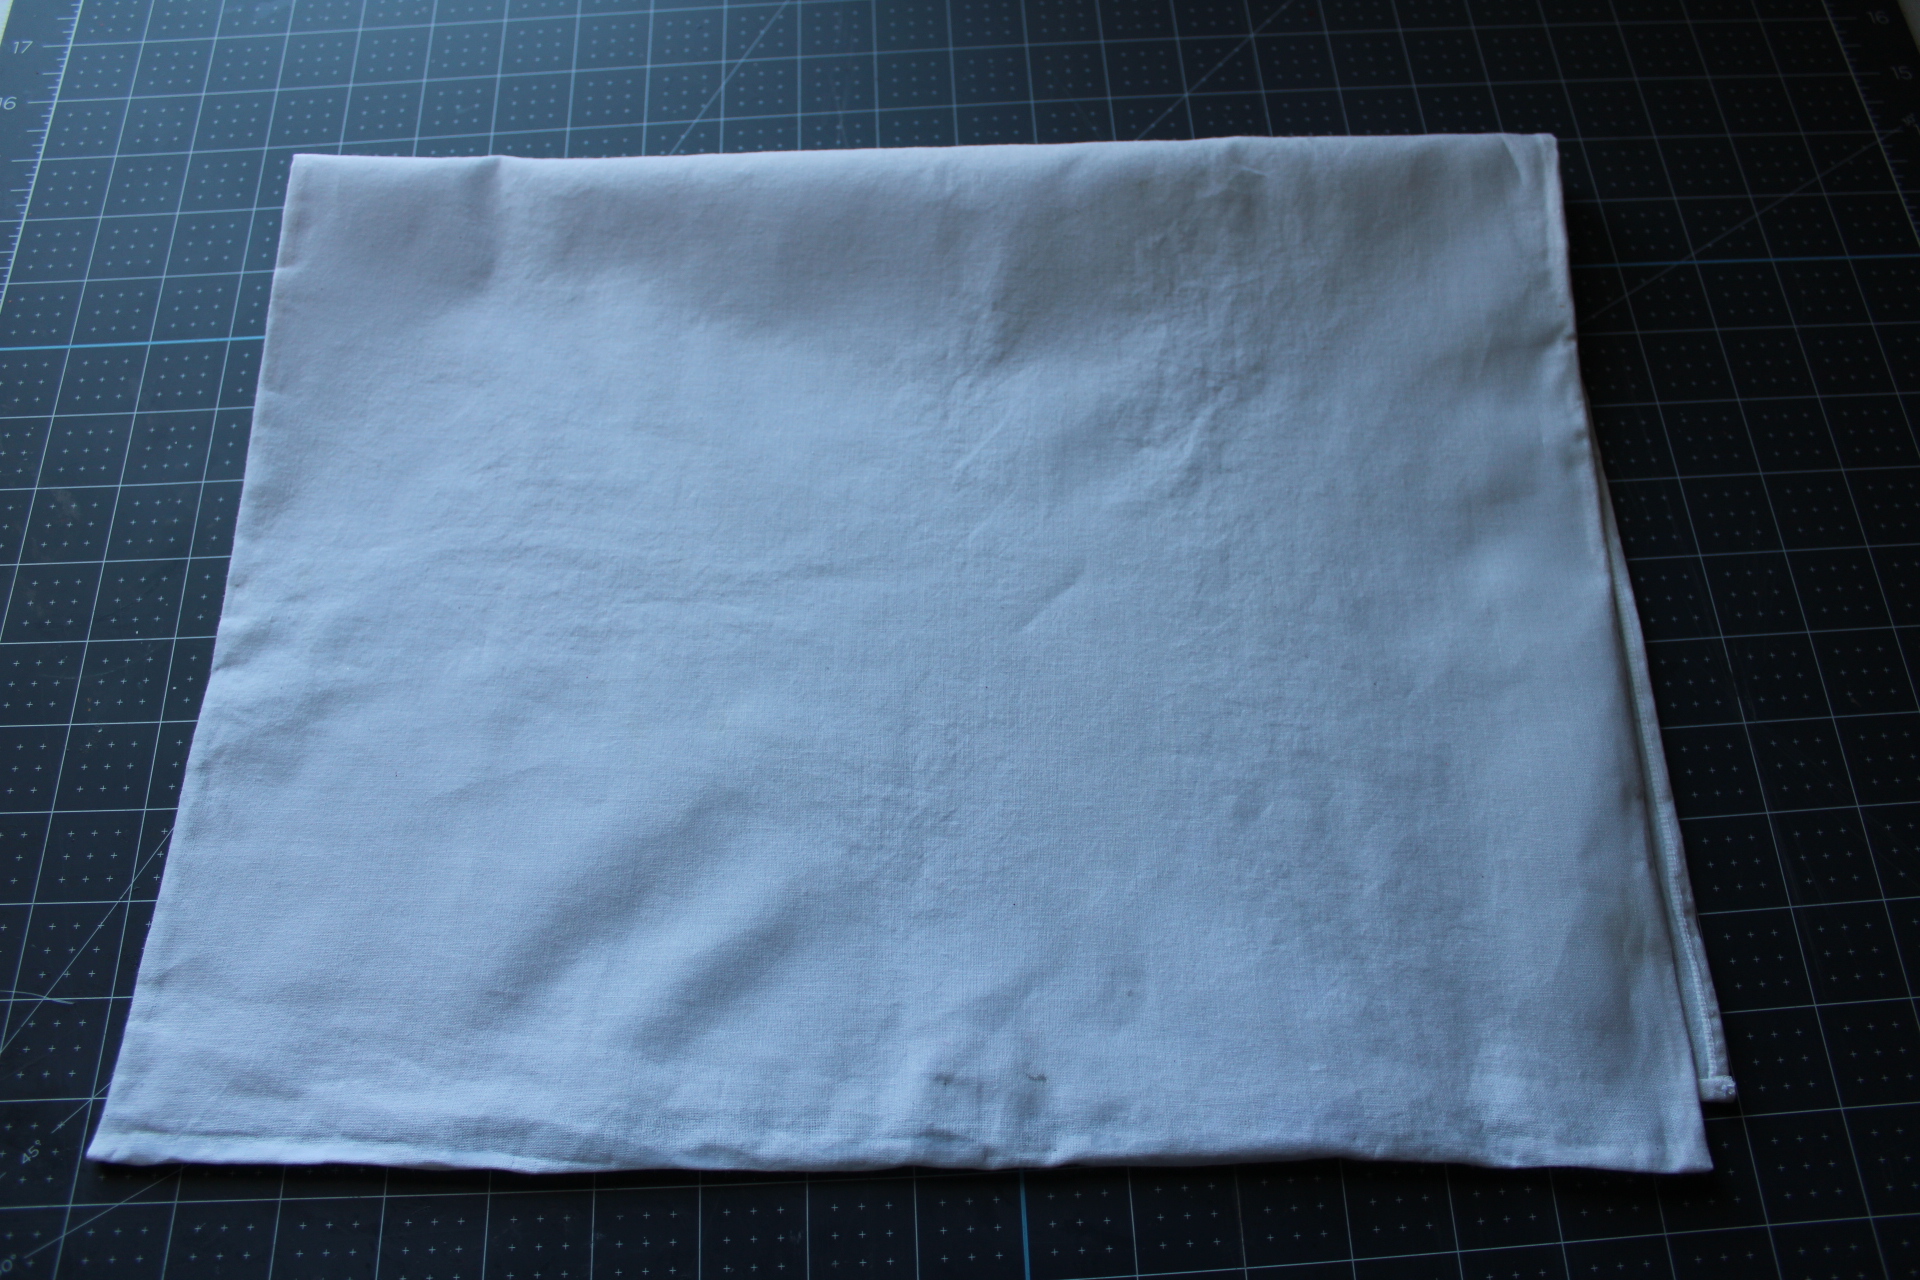 The tea towel folded in half showing the newly no-sew hemmed edges.